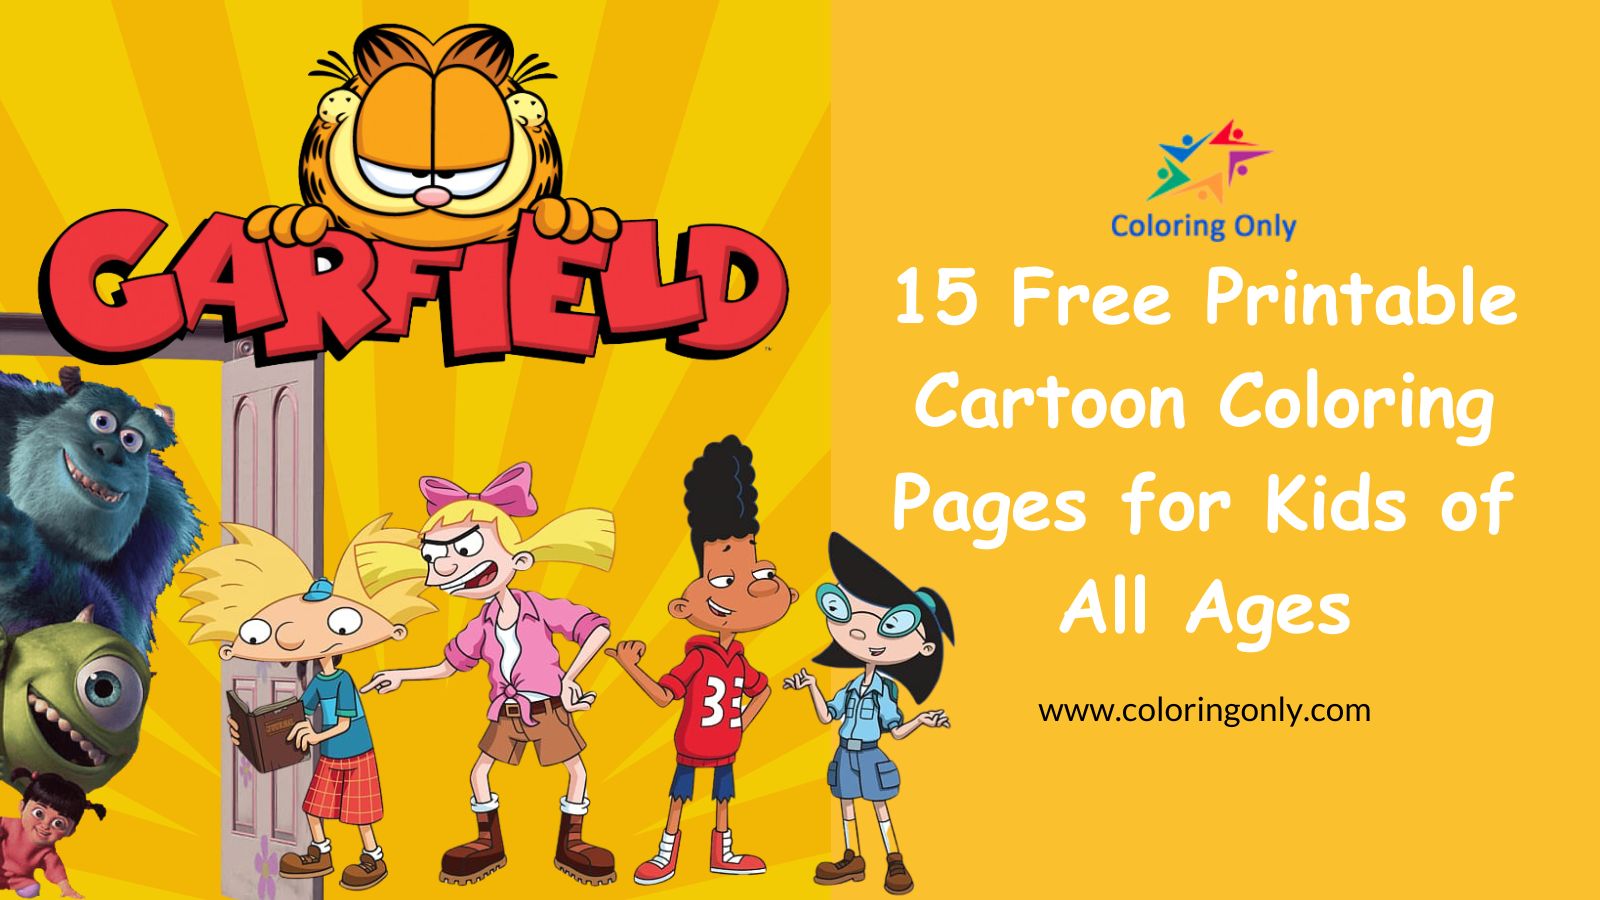 15 Free Printable Cartoon Coloring Pages for Kids of All Ages